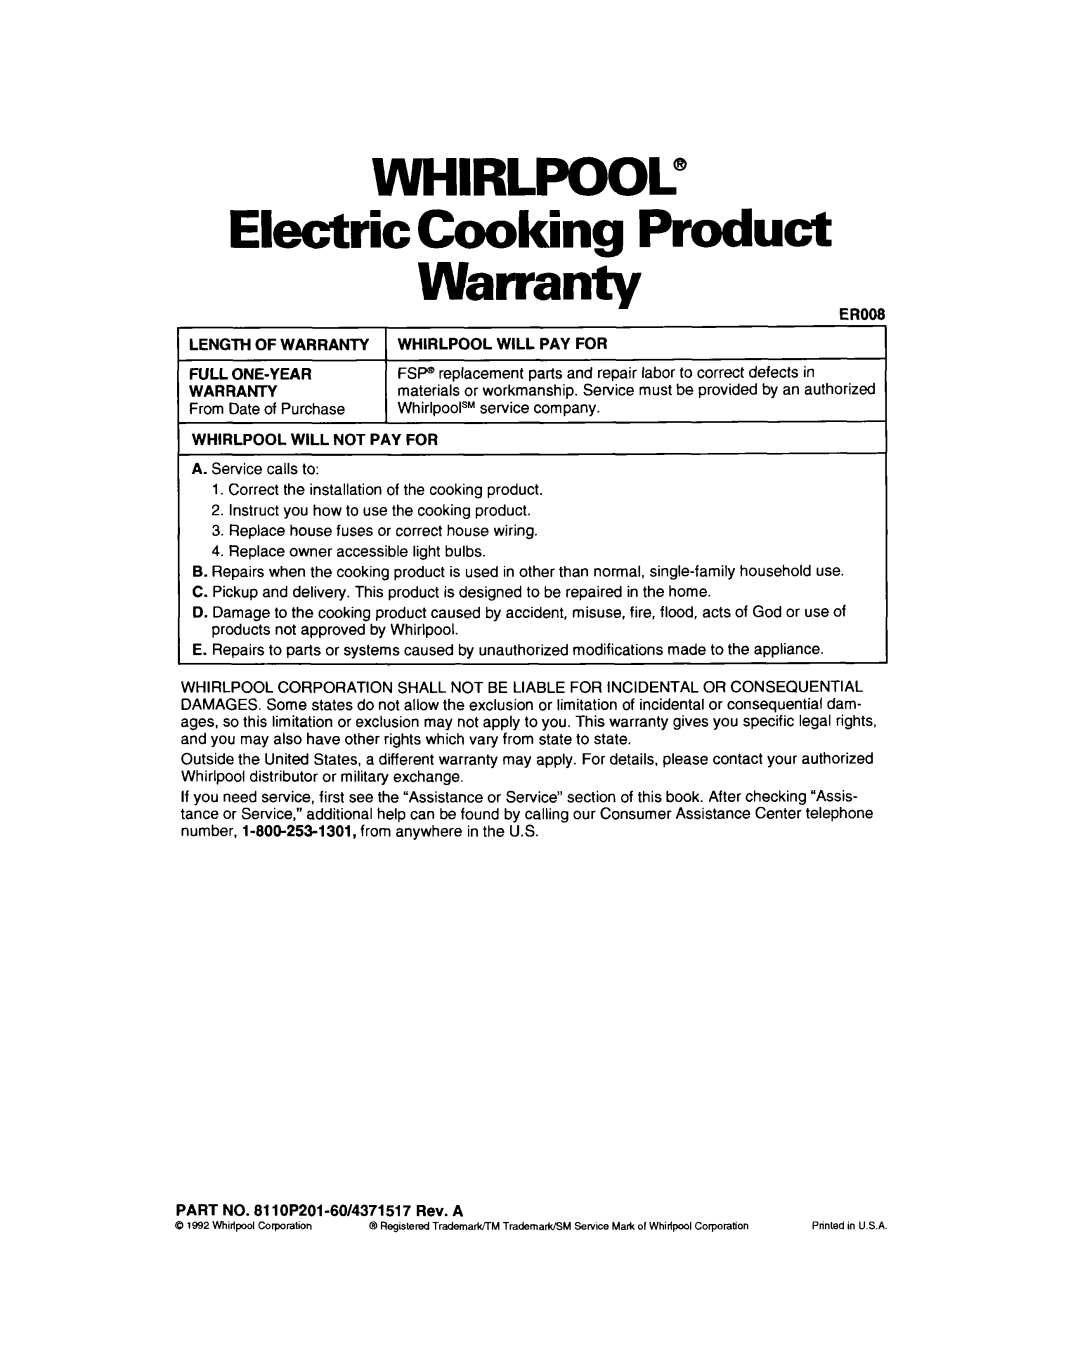 Whirlpool RB262PXY warranty WHIRLPOOL@ Electric Cooking Product, Length Of Warranty Full One-Year Warranty 